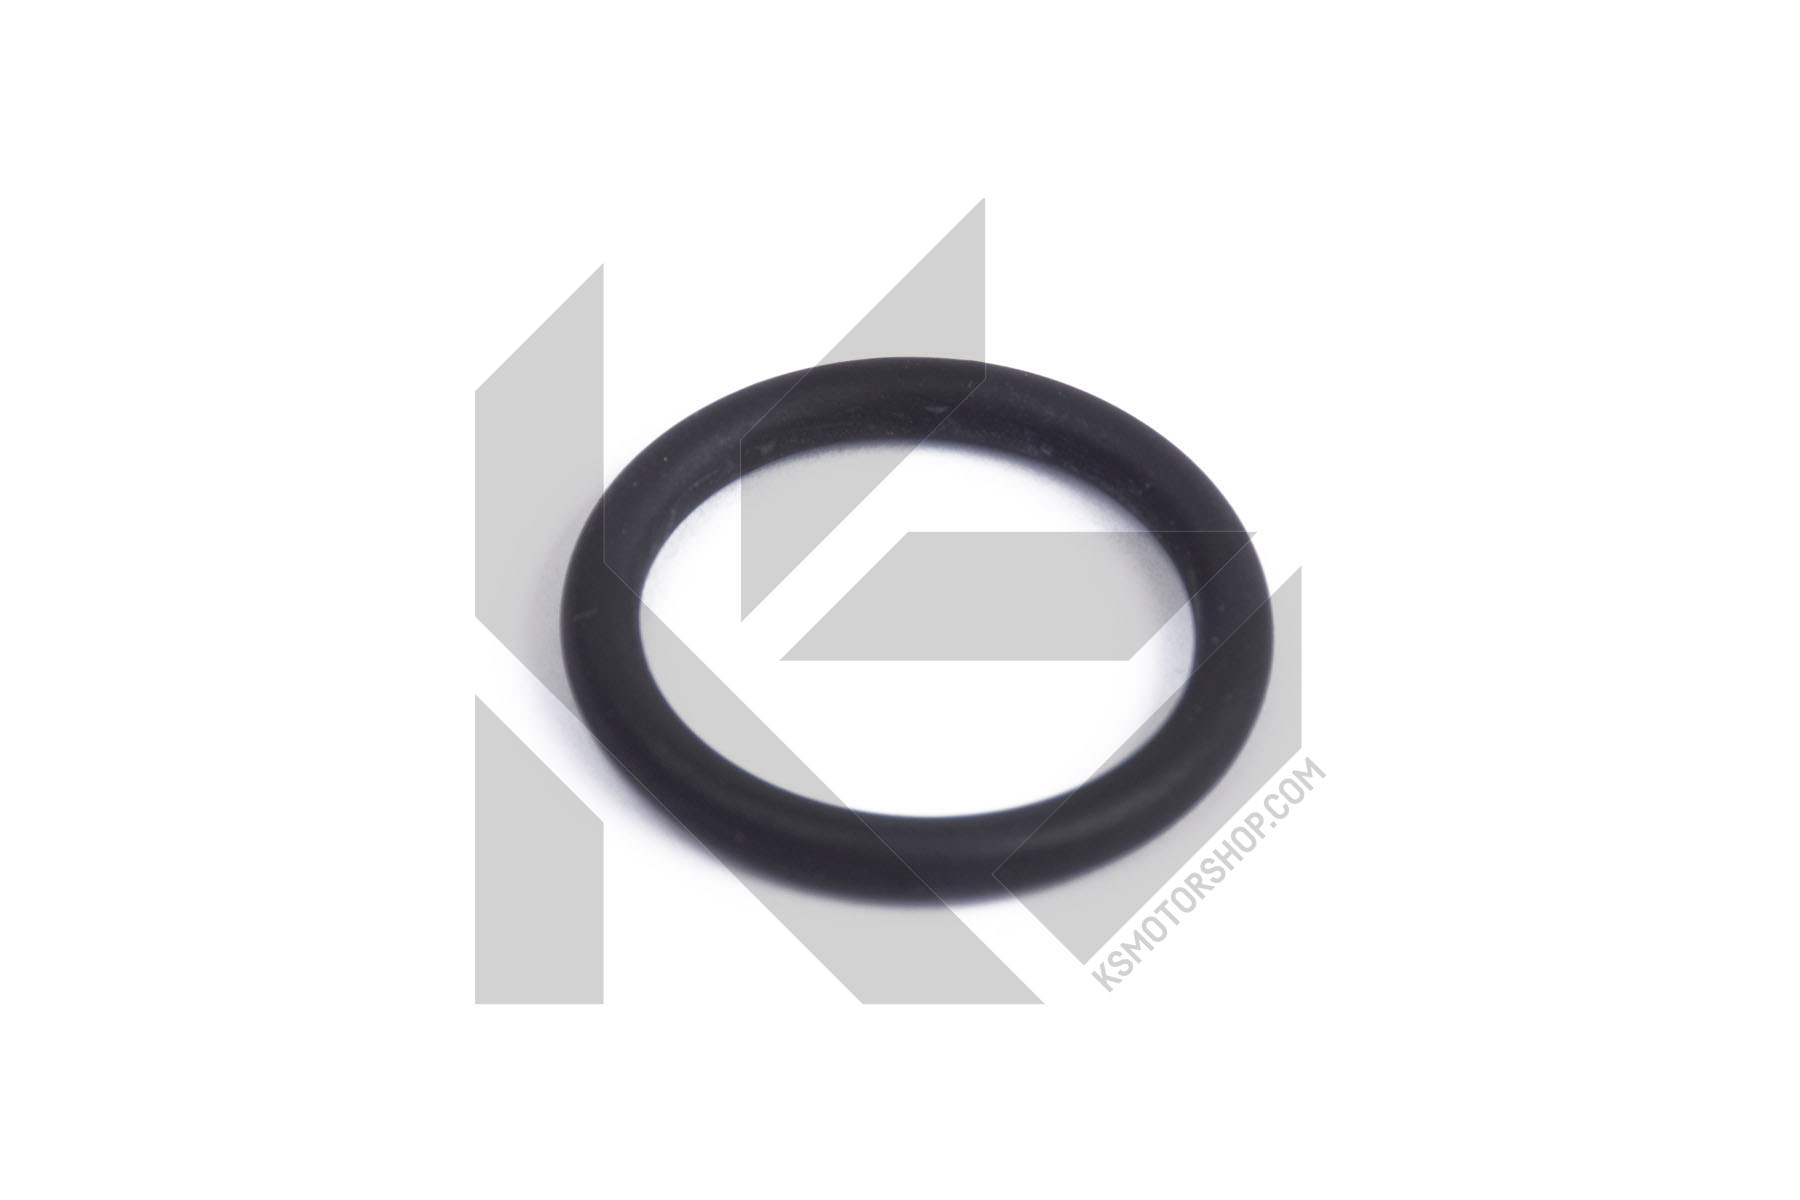 000.230, Seal Ring, O-ring kit, ELRING, 0179973345, 4890926, 51.96501-0502, 99610590103, 0219976248, 51.96501-0699, 5419970545, A0179973345, A0219976248, A5419970545, 01.10.138, 104678, F00RJ01026, 51965010502, A419970545